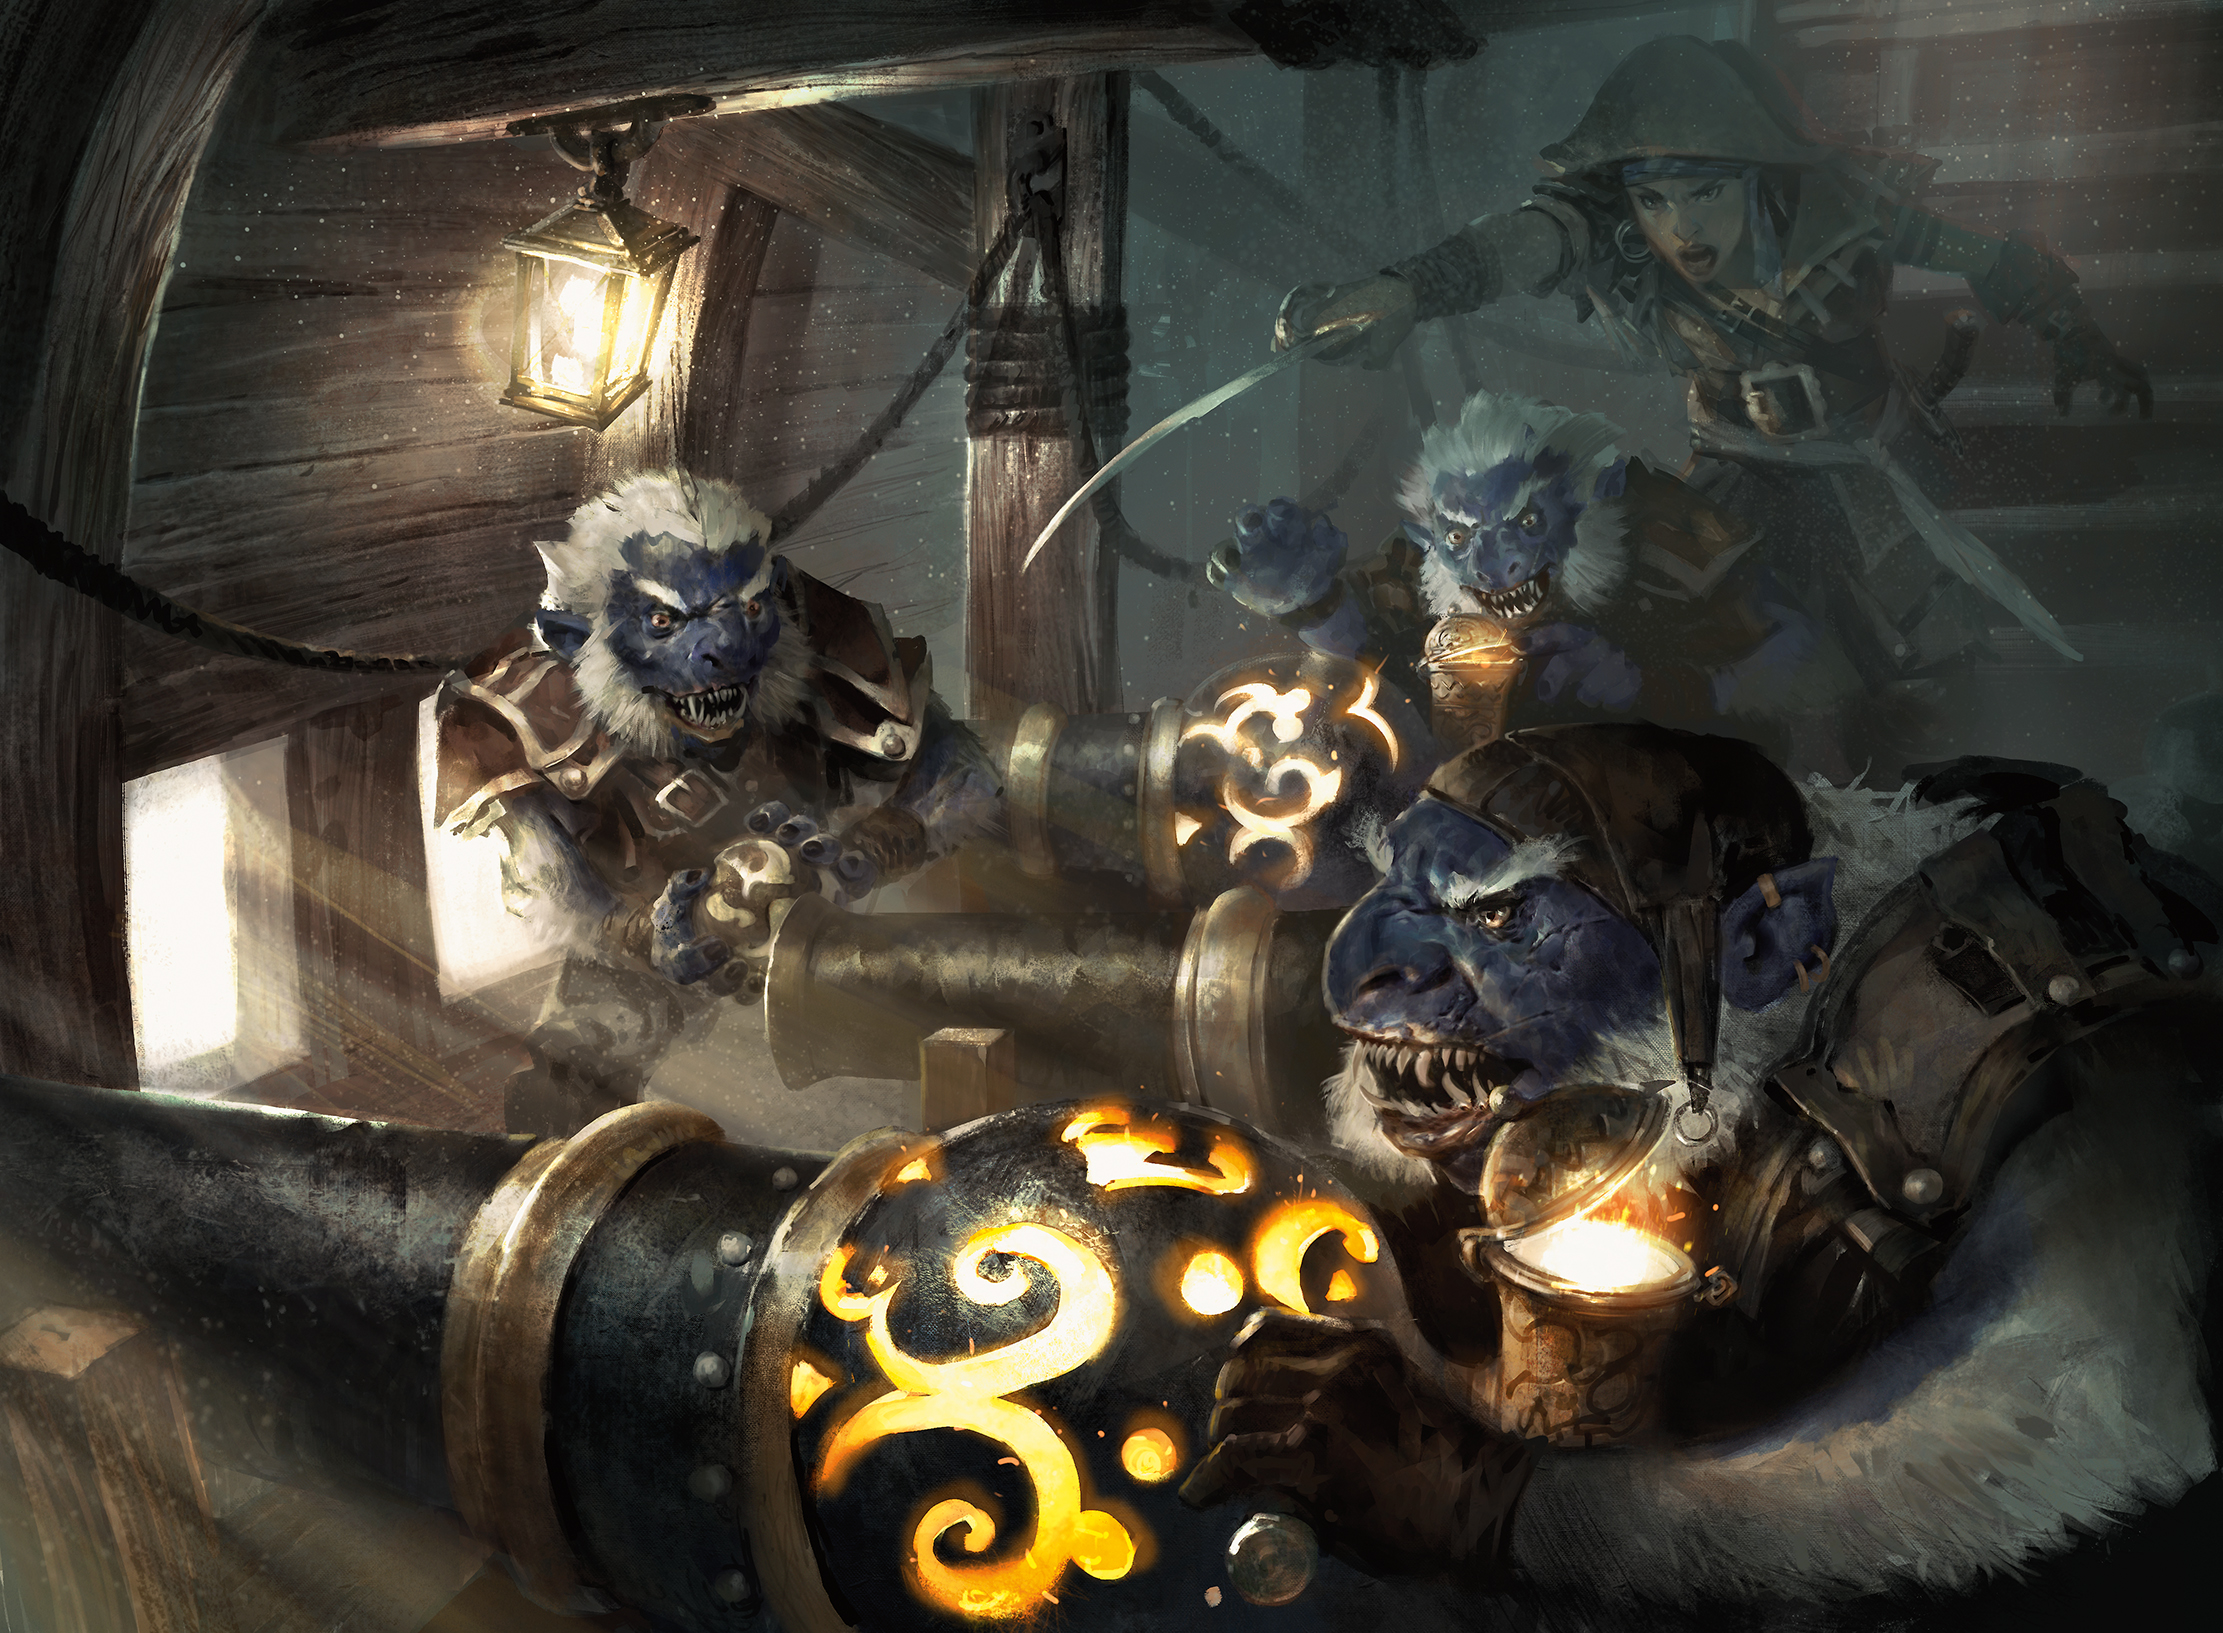 Vampire Pirates Abound In This Gorgeous New Magic: The Gathering Art